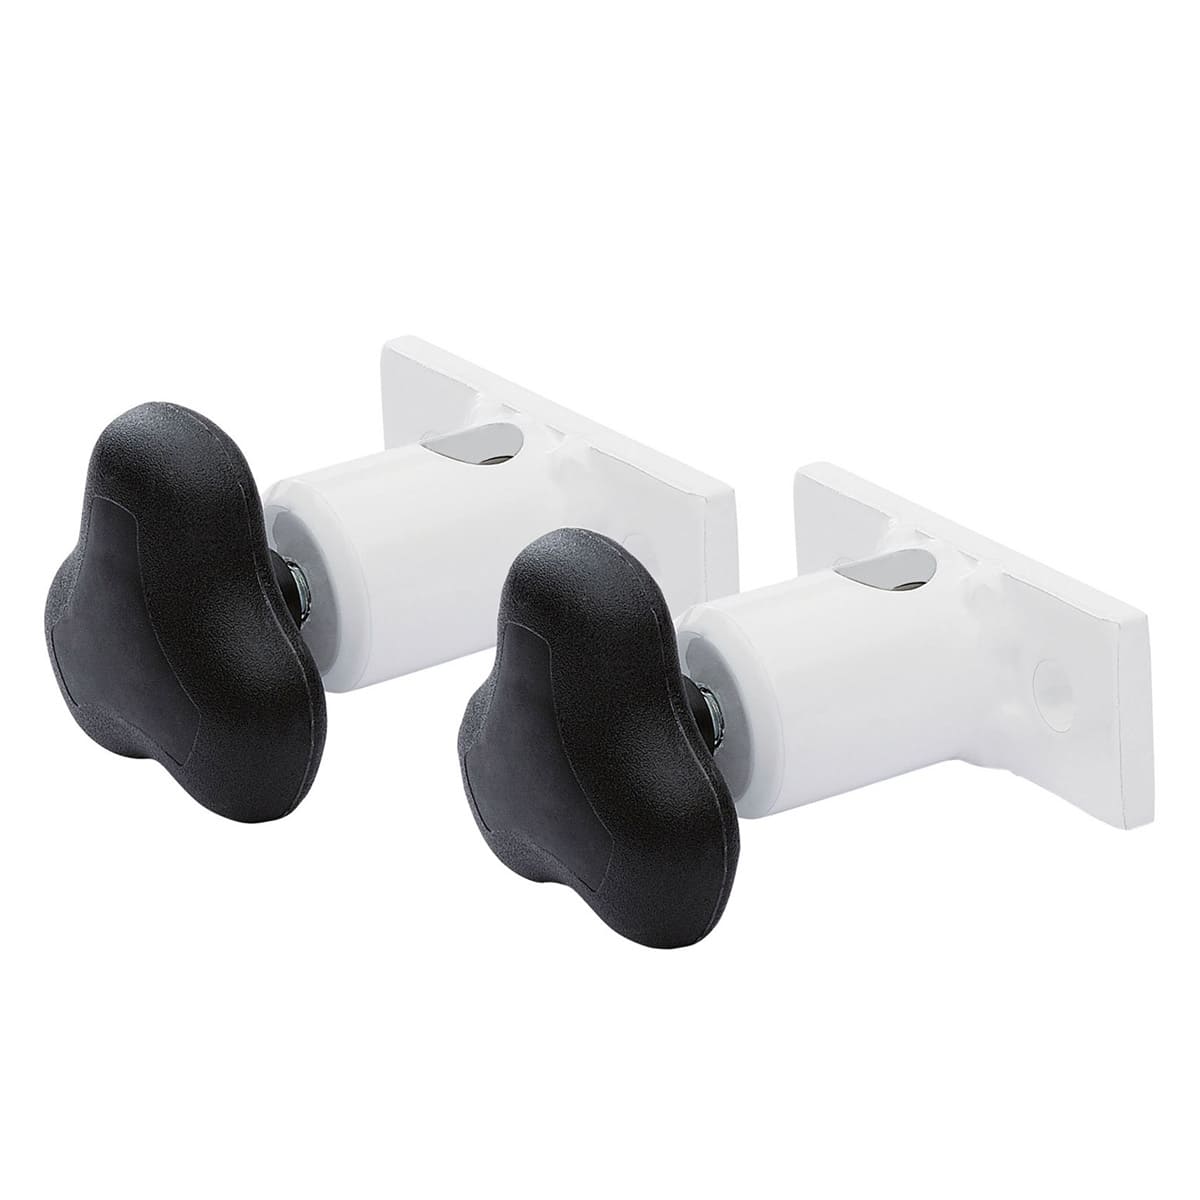 Pair of clamps diam. 14mm for blood test splints and/or stirrups